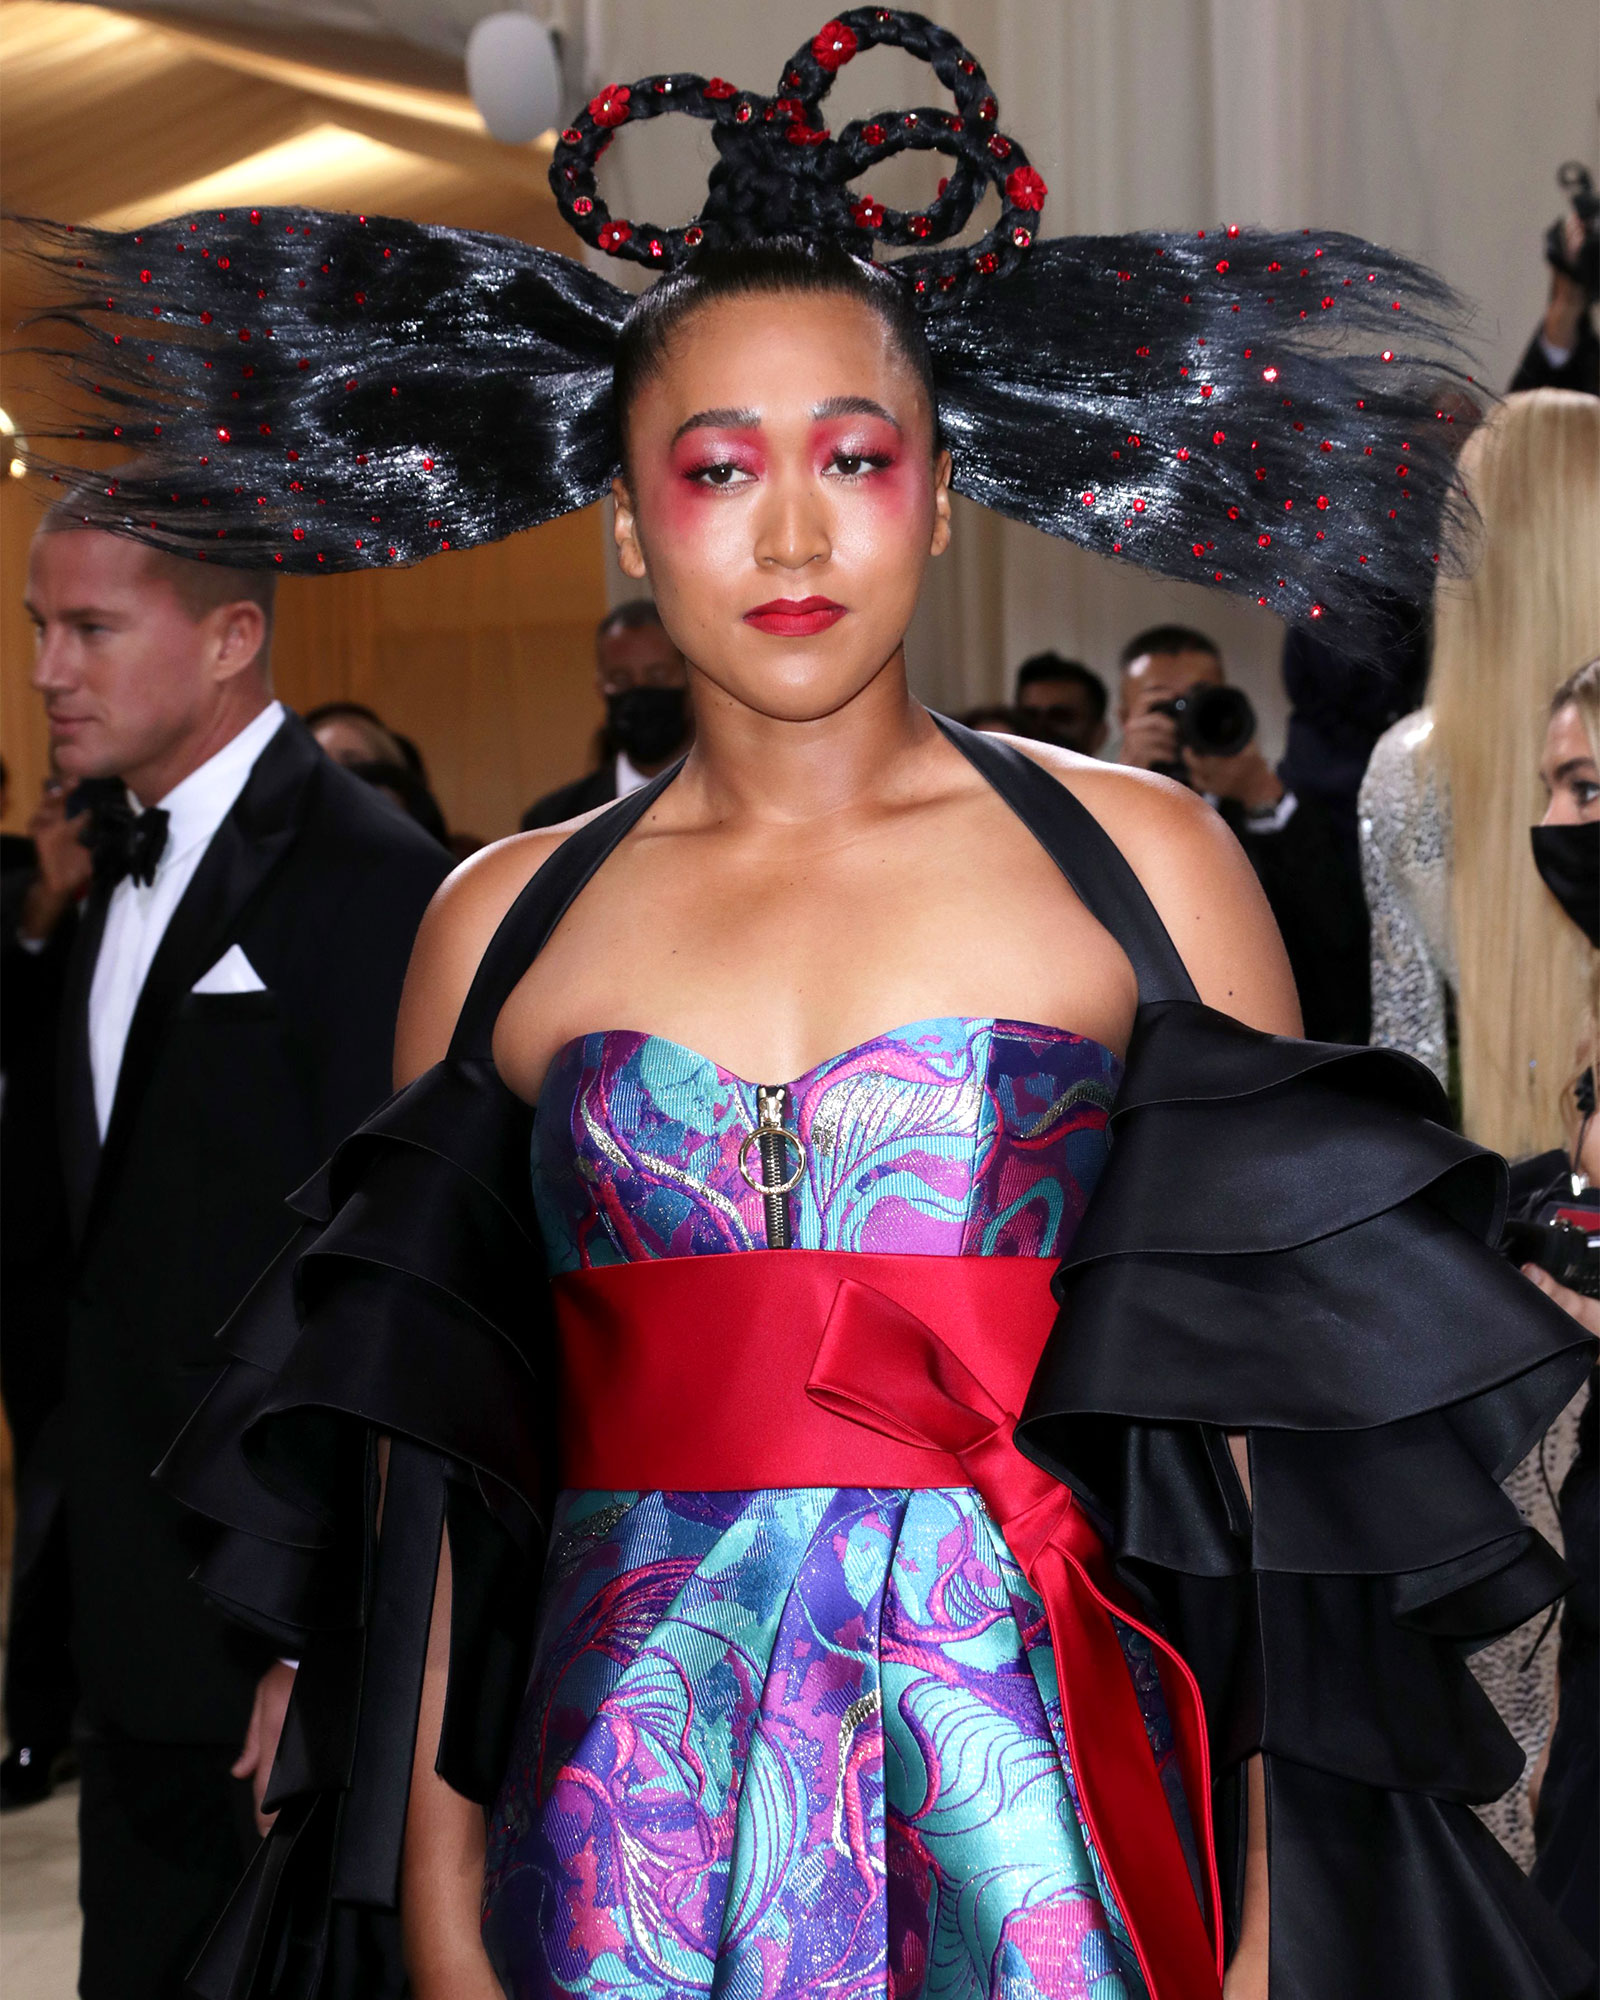 Naomi Osaka arrives at Met Gala in glamorous outfit co-designed by